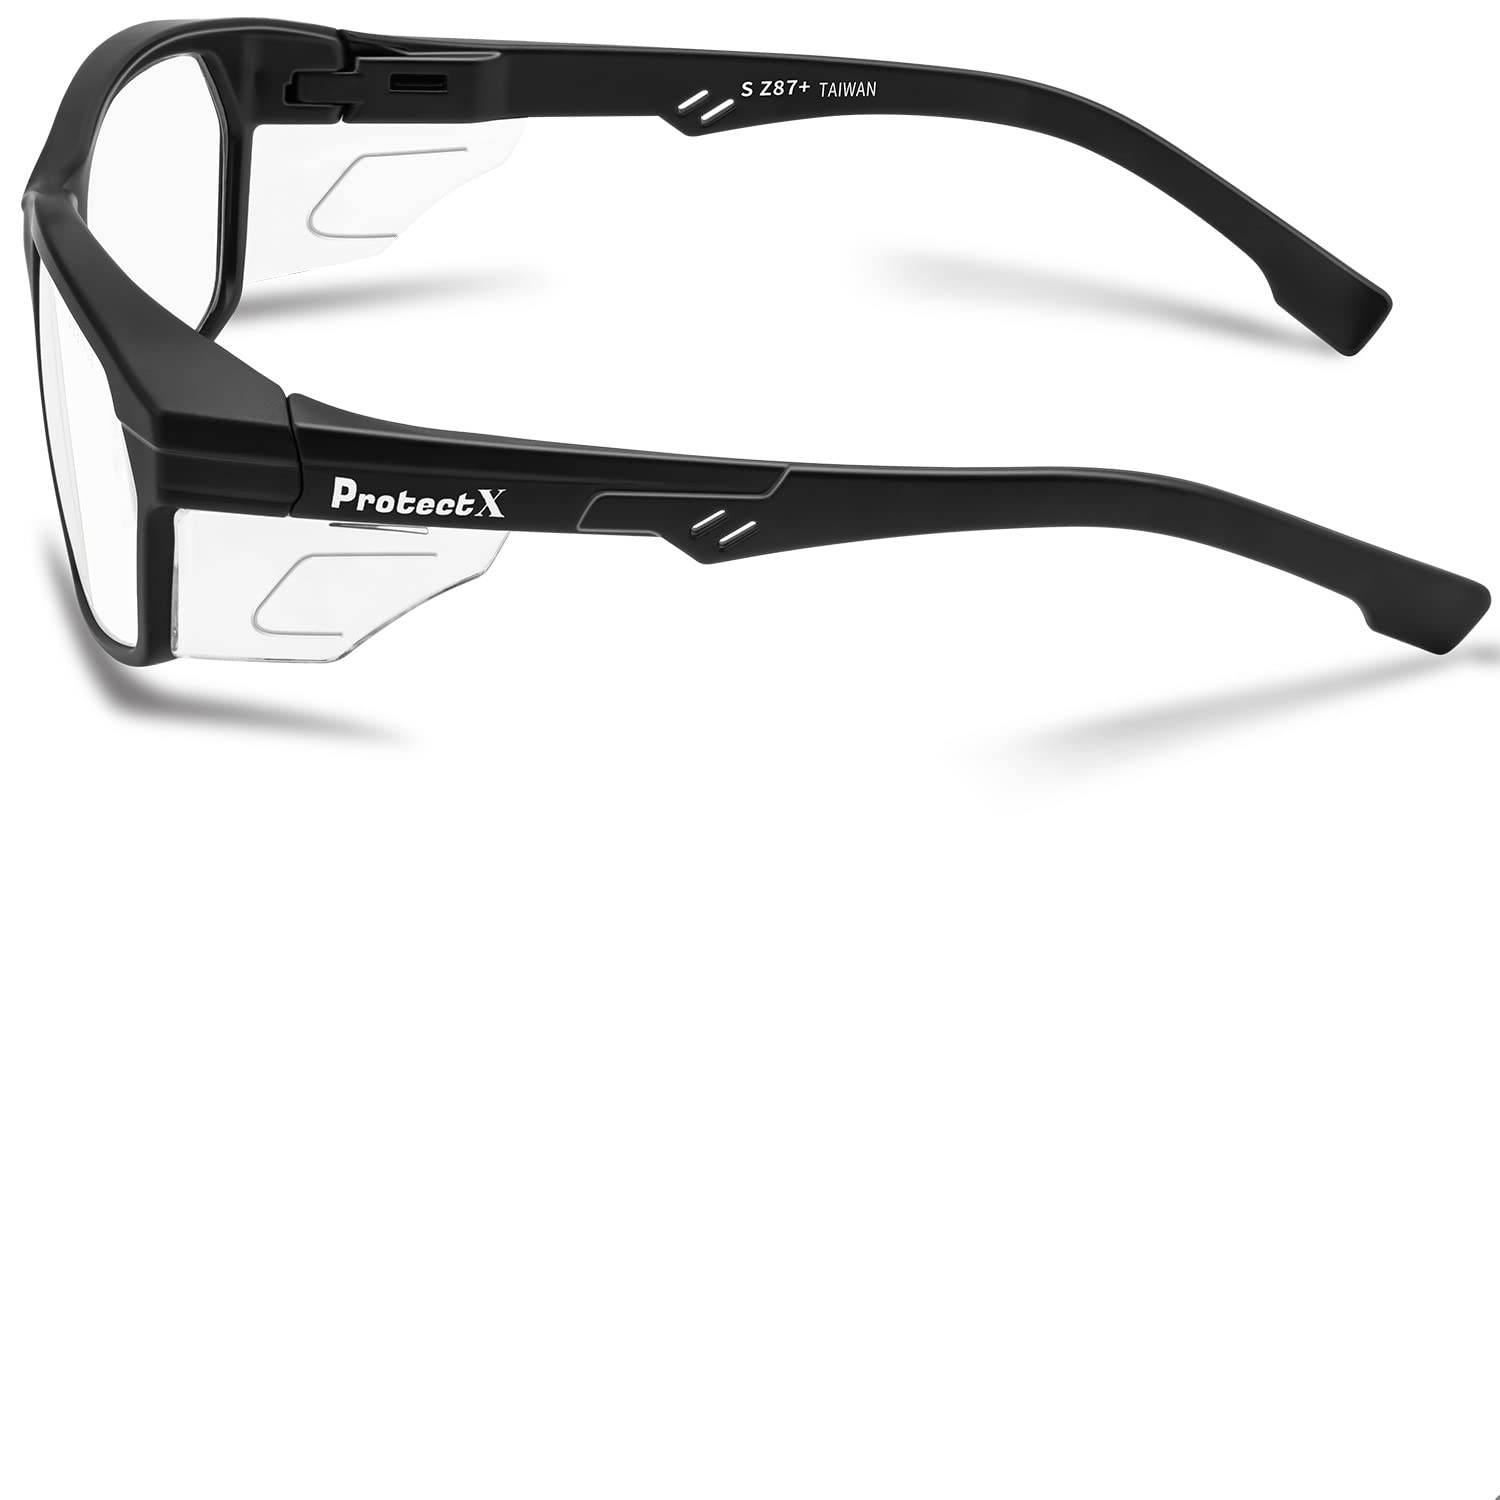 ProtectX Safety Reading Glasses 1.5 Diopter, Safety Glasses with Readers 1.5, Reader Safety Glasses 1.5, ANSI Z87.1 Rated with UV Protection